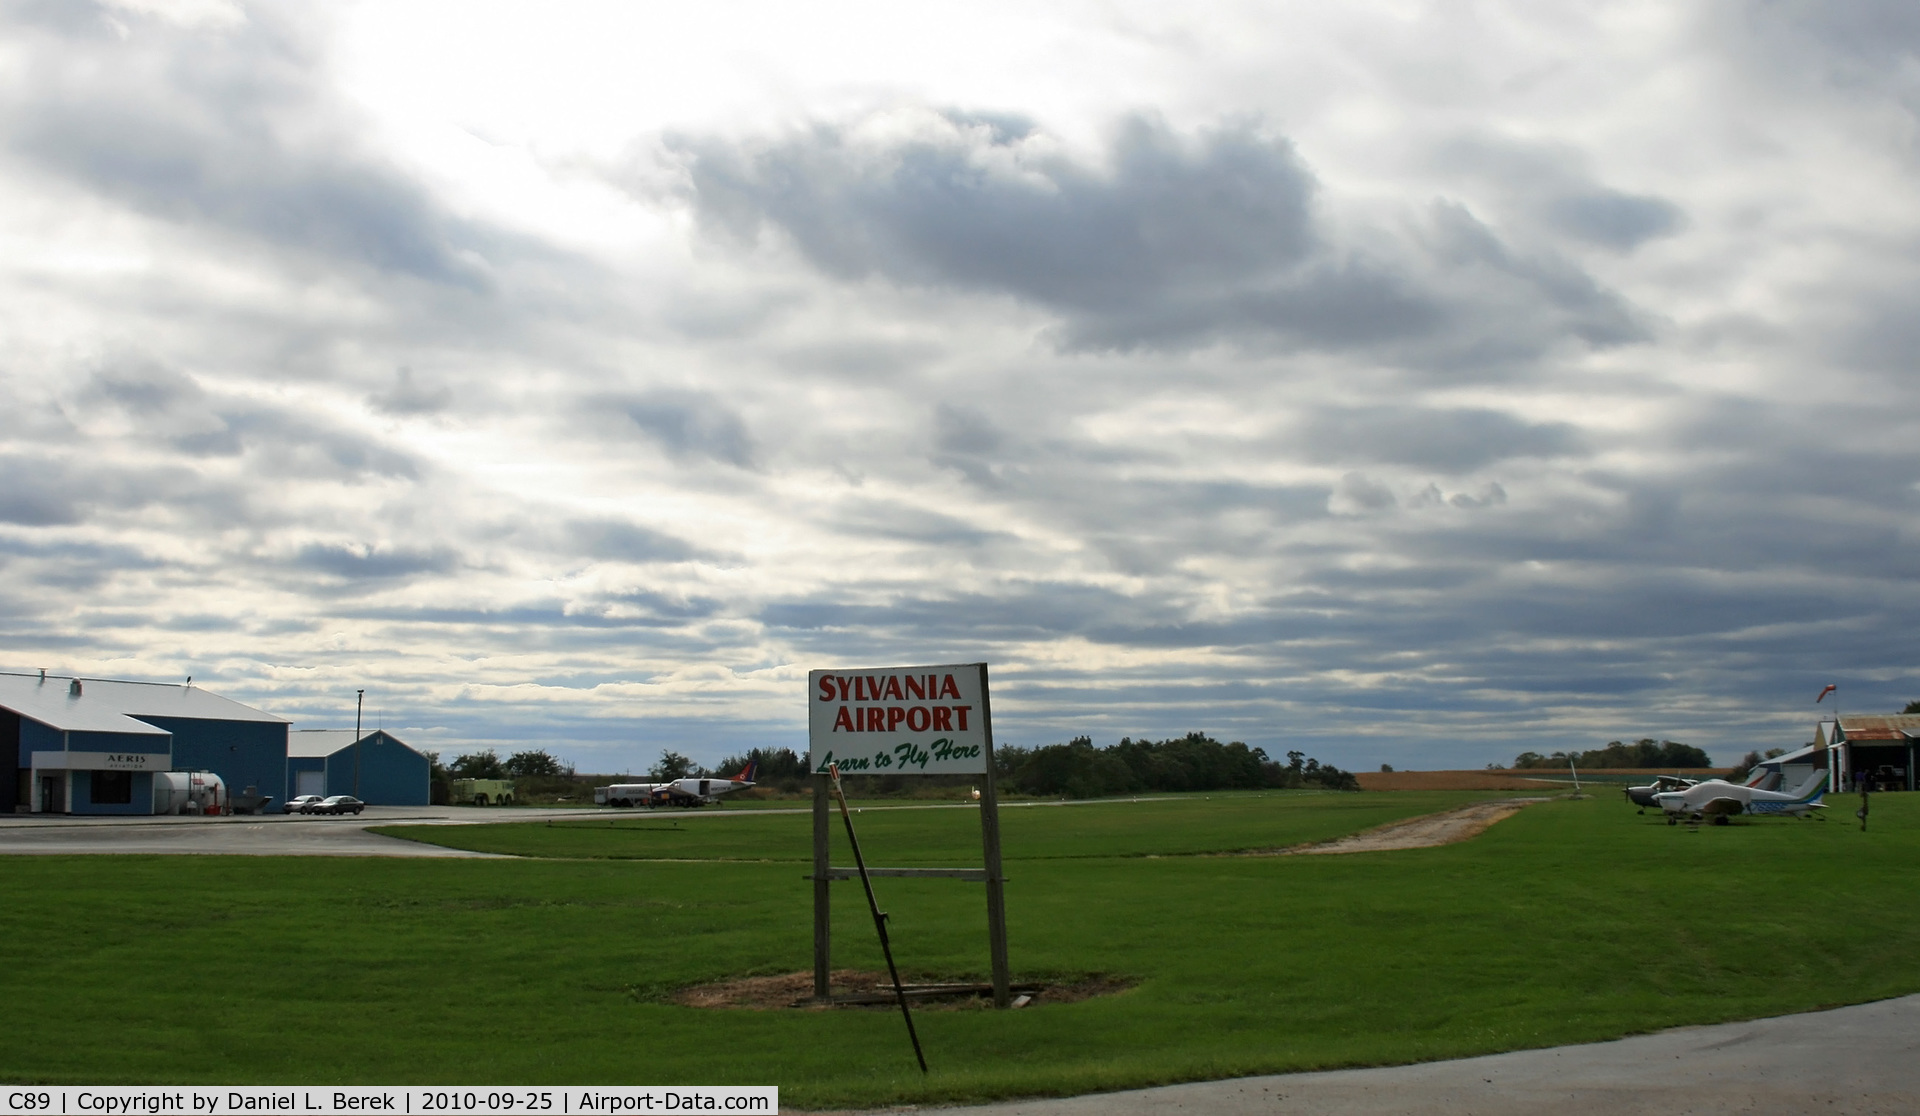 Sylvania Airport (C89) - Though it's surrounded by larger airports, Silvania offers flying lessons and skydiving. 